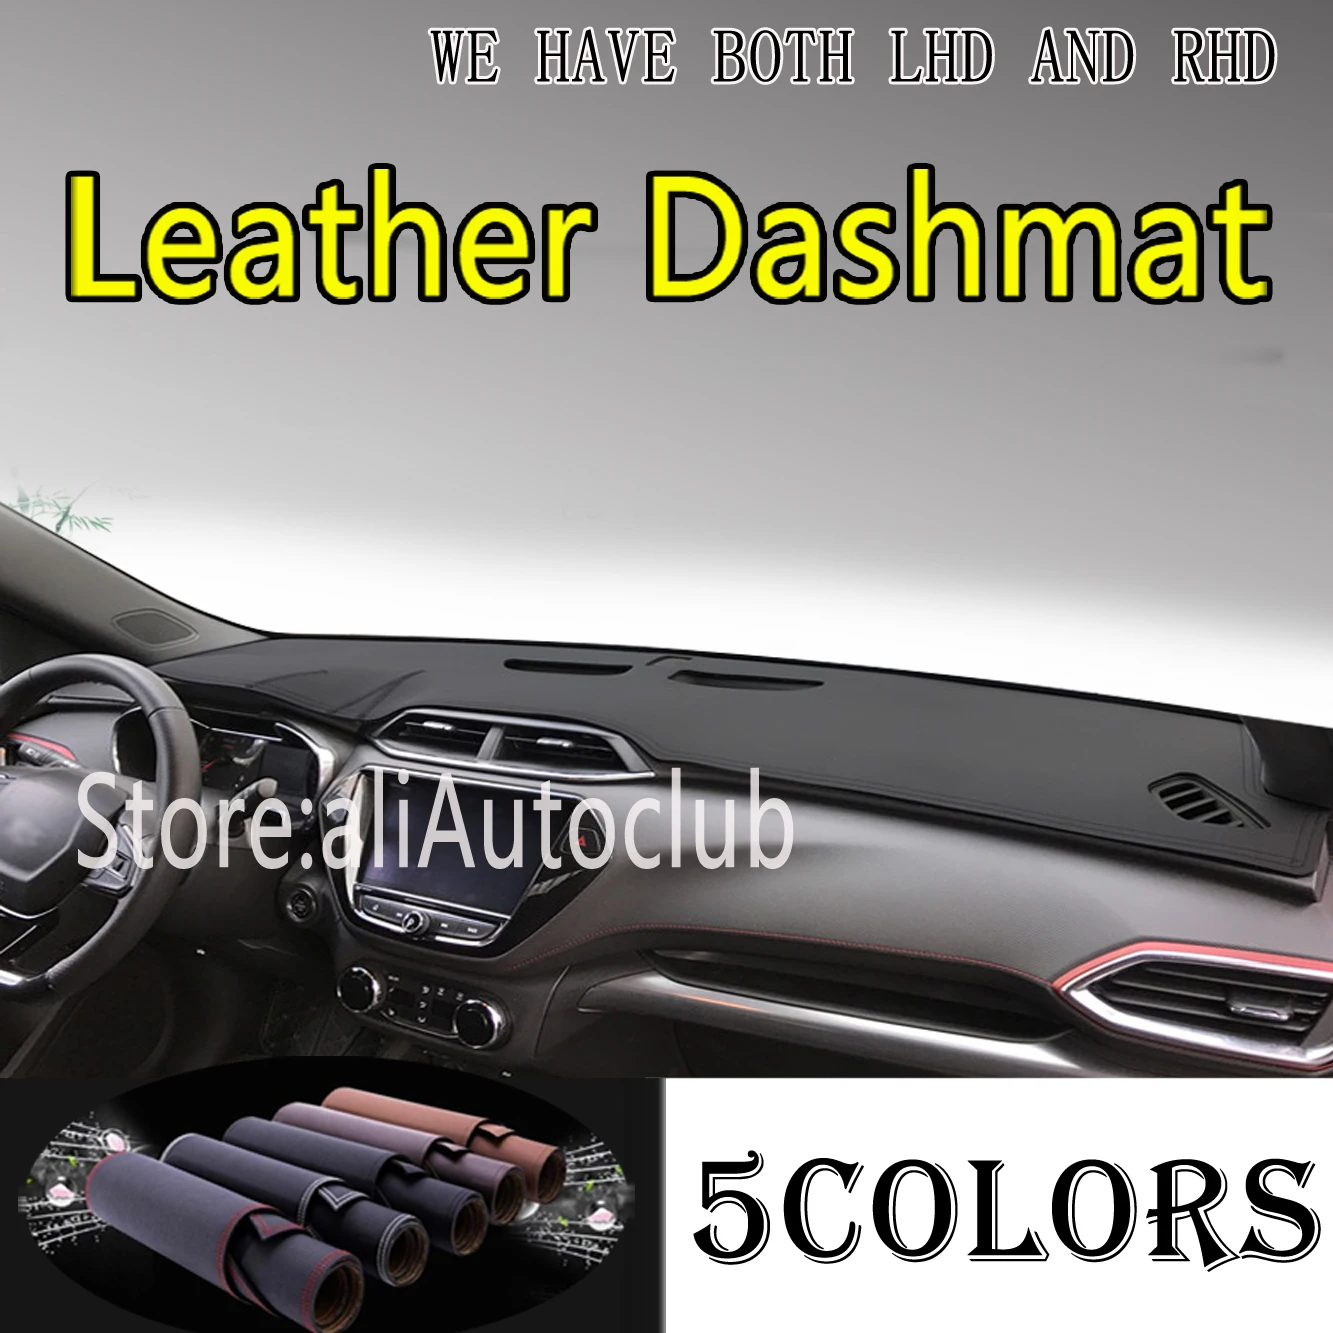 DashMat SuedeMat Dashboard Cover Chevrolet and GMC Faux-Suede, Gray 